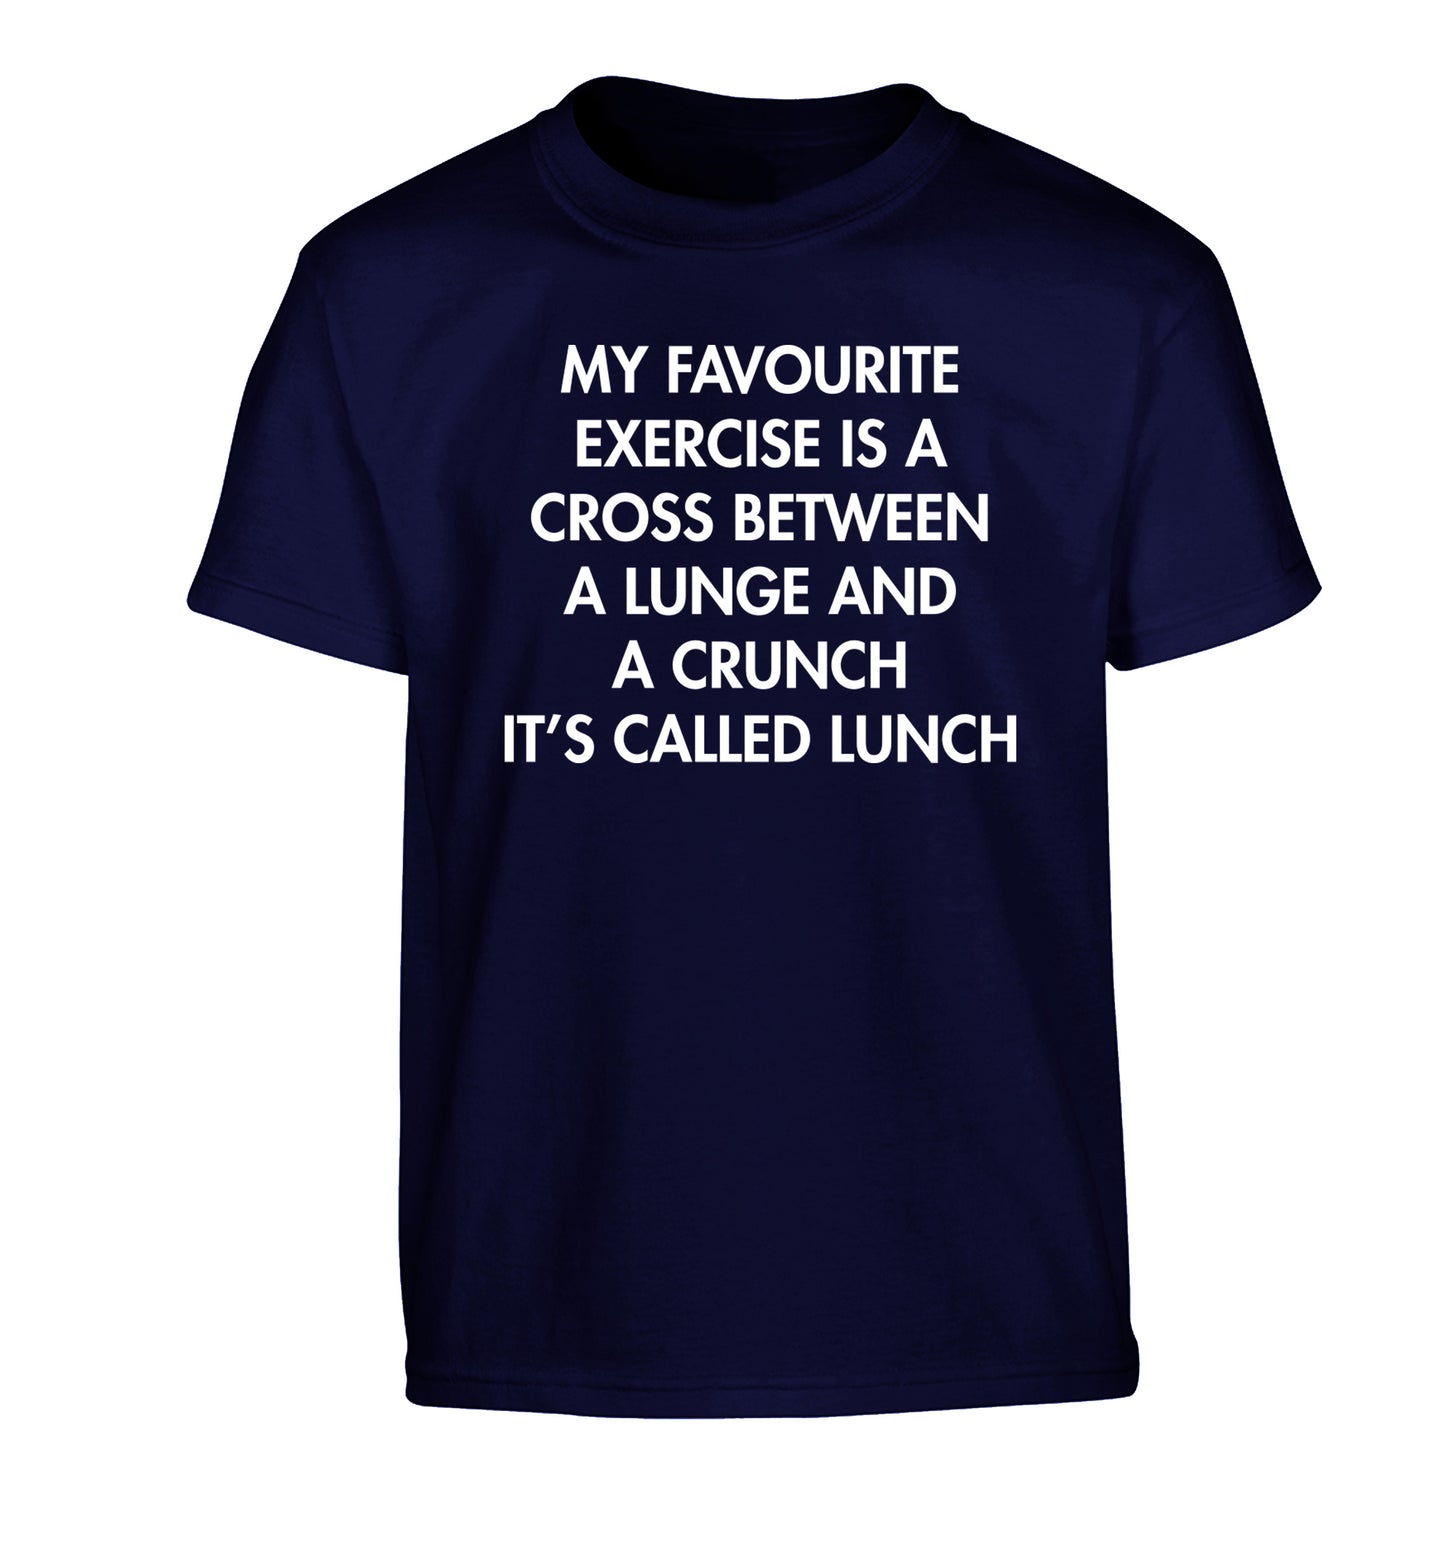 My favourite exercise is a cross between a lung and a crunch it's called lunch Children's navy Tshirt 12-14 Years